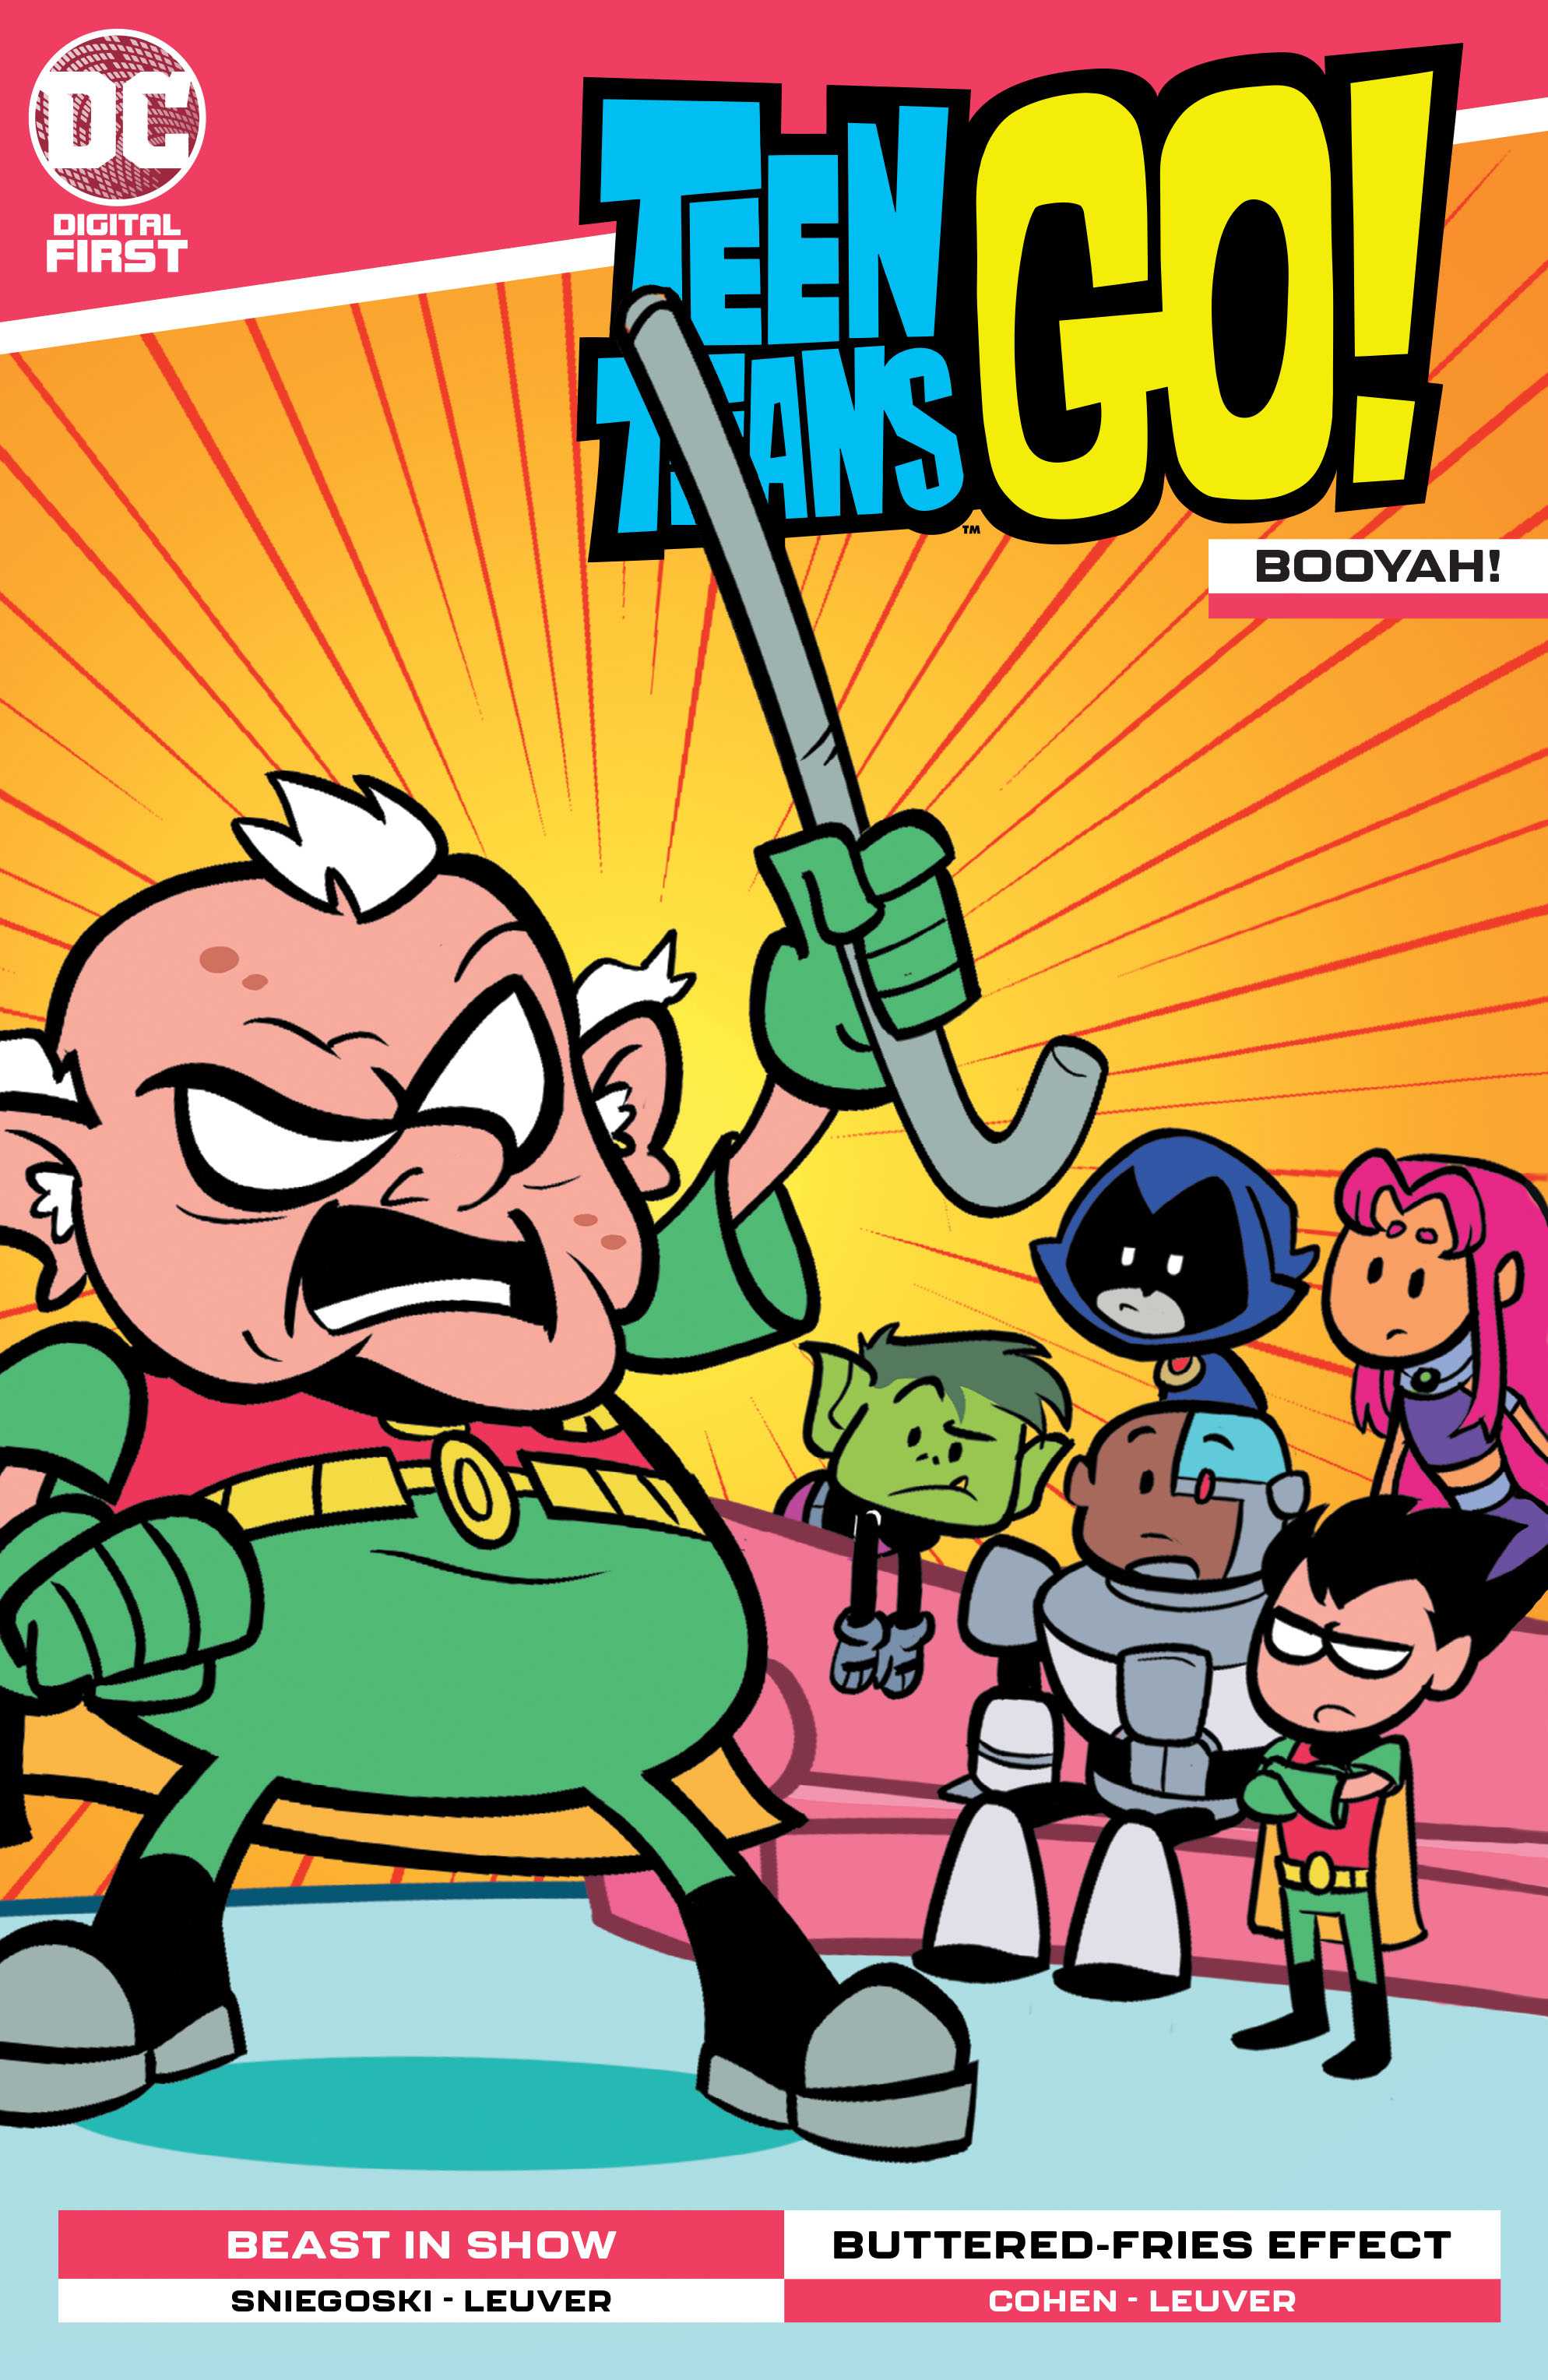 Teen Titans Go!: Booyah! (2020-): Chapter 3 - Page 1